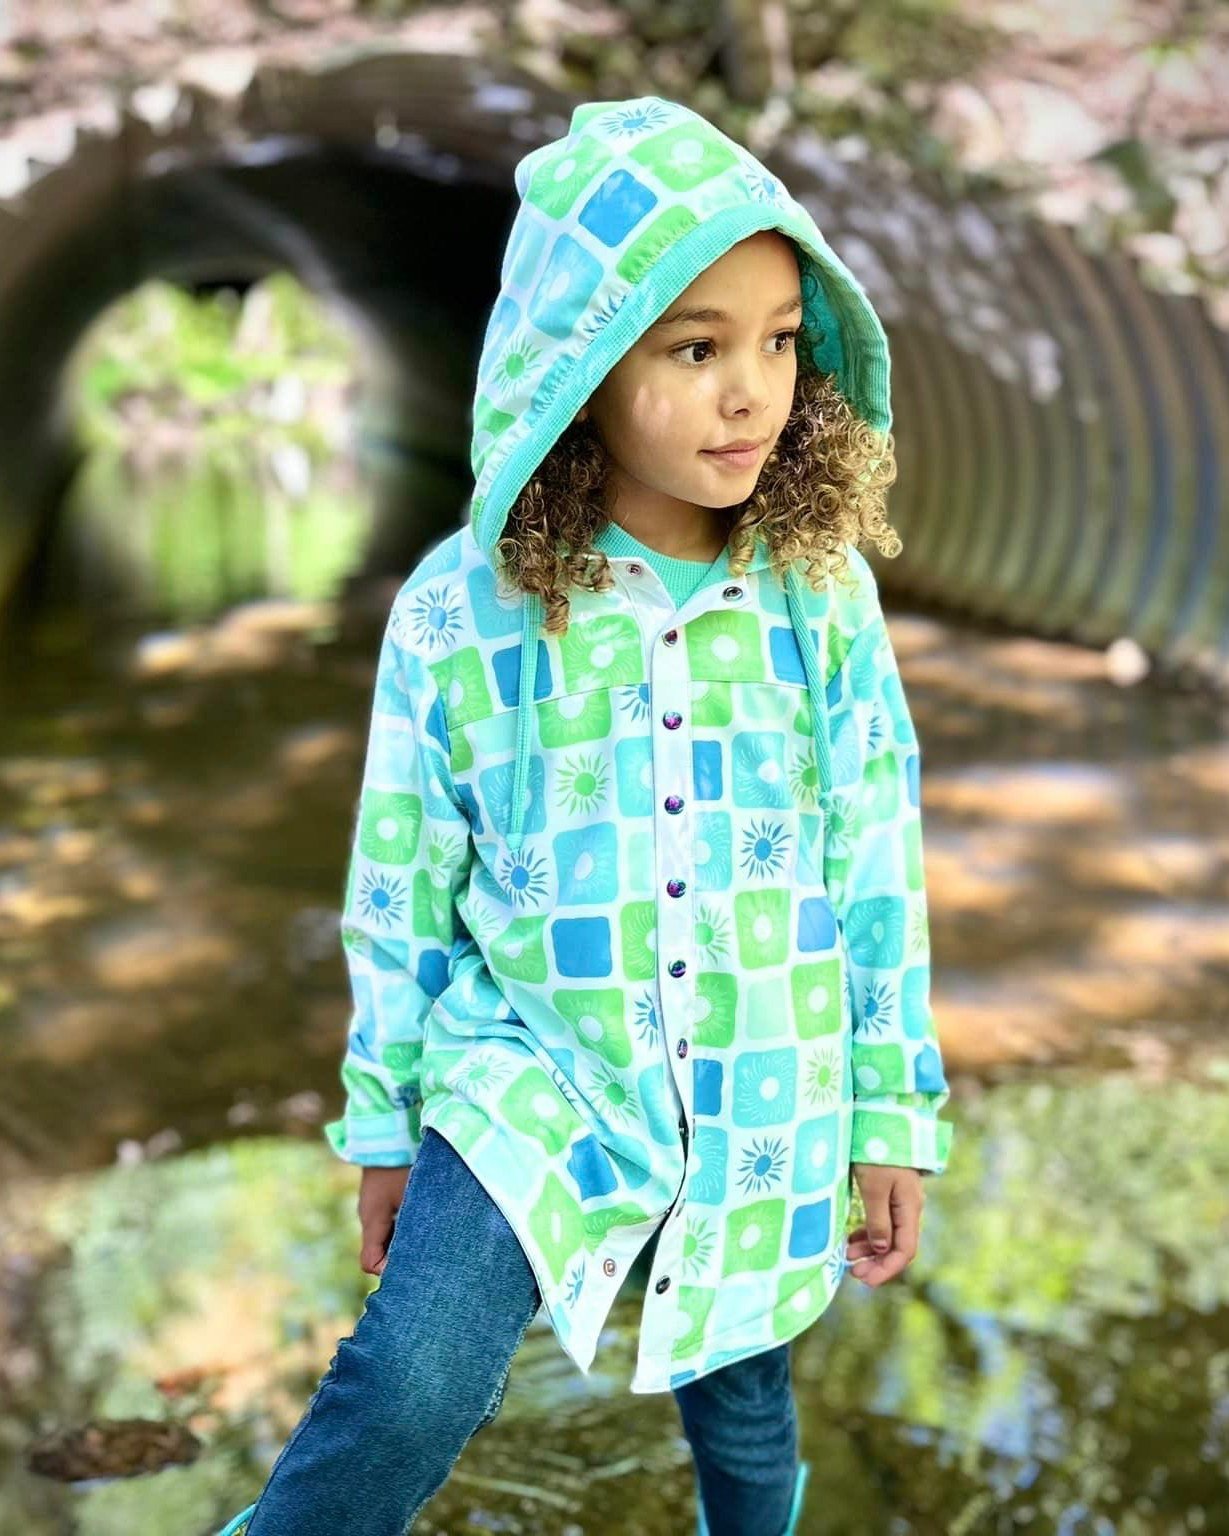 ooh what a stunning raincoat and photoshoot from @bygeorge.shop with my Utopia Summer Suns print design.

Fabric @carriagehouseprinteryfabric
Raincoat @bygeorge.shop
Print design @jacslade

#Jacslade #jacsladefabrics #carriagehouseprintery #handmade 